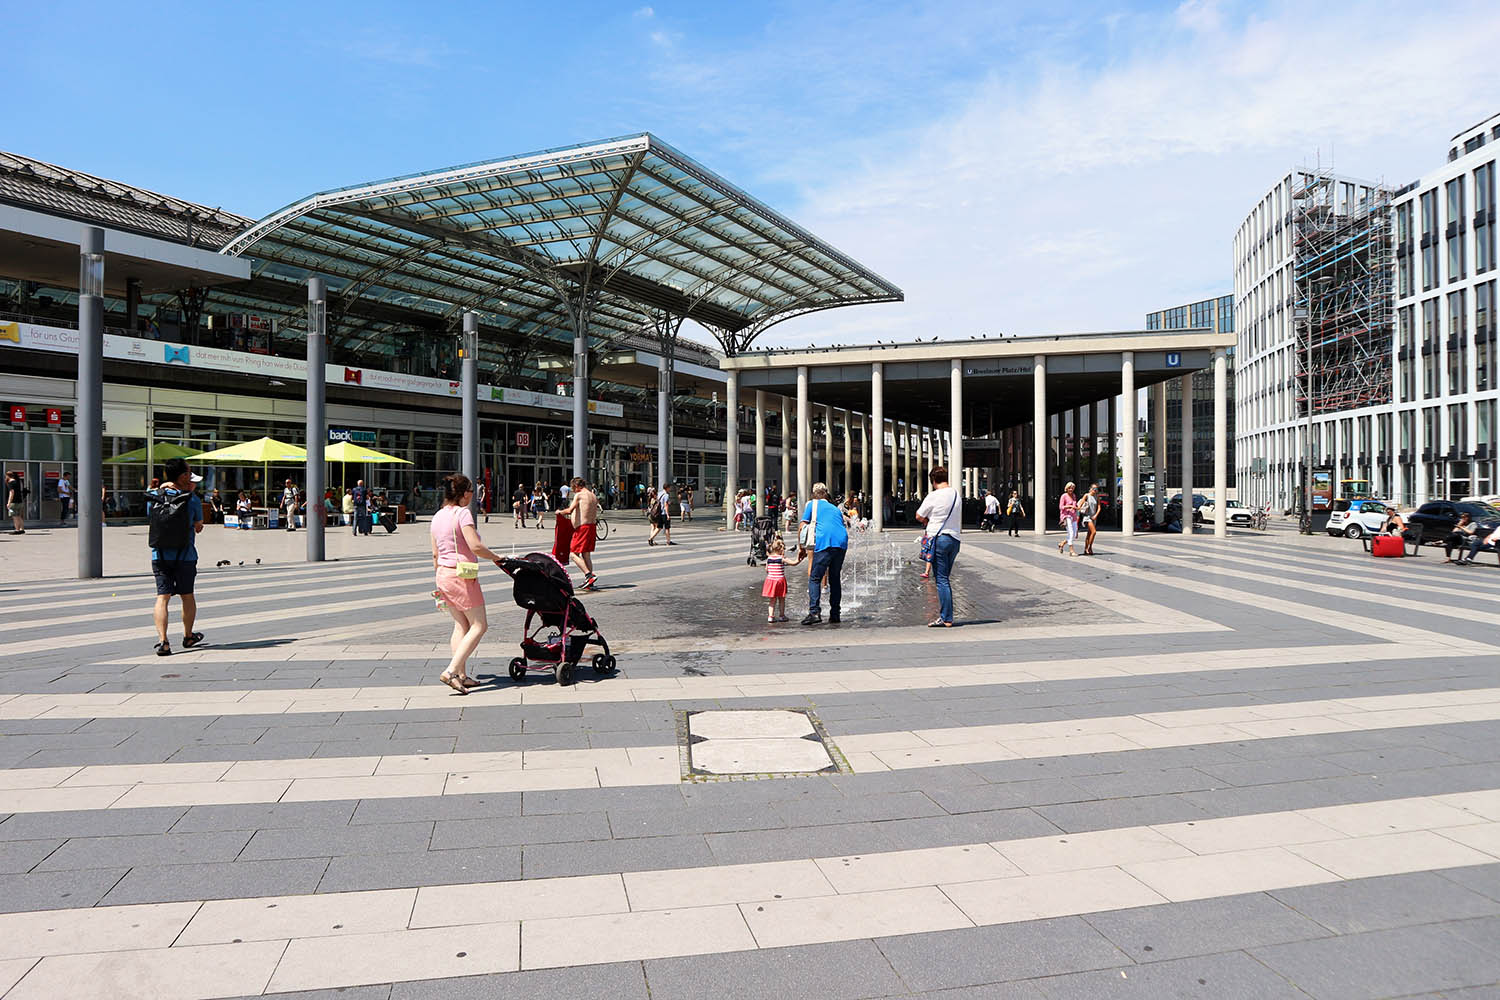 Designed by Büder + Metzel Architekten, Brühl/Cologne. Breslauer Platz is a square on the northeast side of the central train station. The transformation into an urban space took some time. The work done by Kai Büder and Manfred Metzel resulted in greater transparency and a clearly designed, public space with more room for pedestrians. Under each of the three column-supported pavilion roofs of the station, a weather-protected extension of the front plaza areas has arisen, as an entrance to the subway station and to the central train station. 